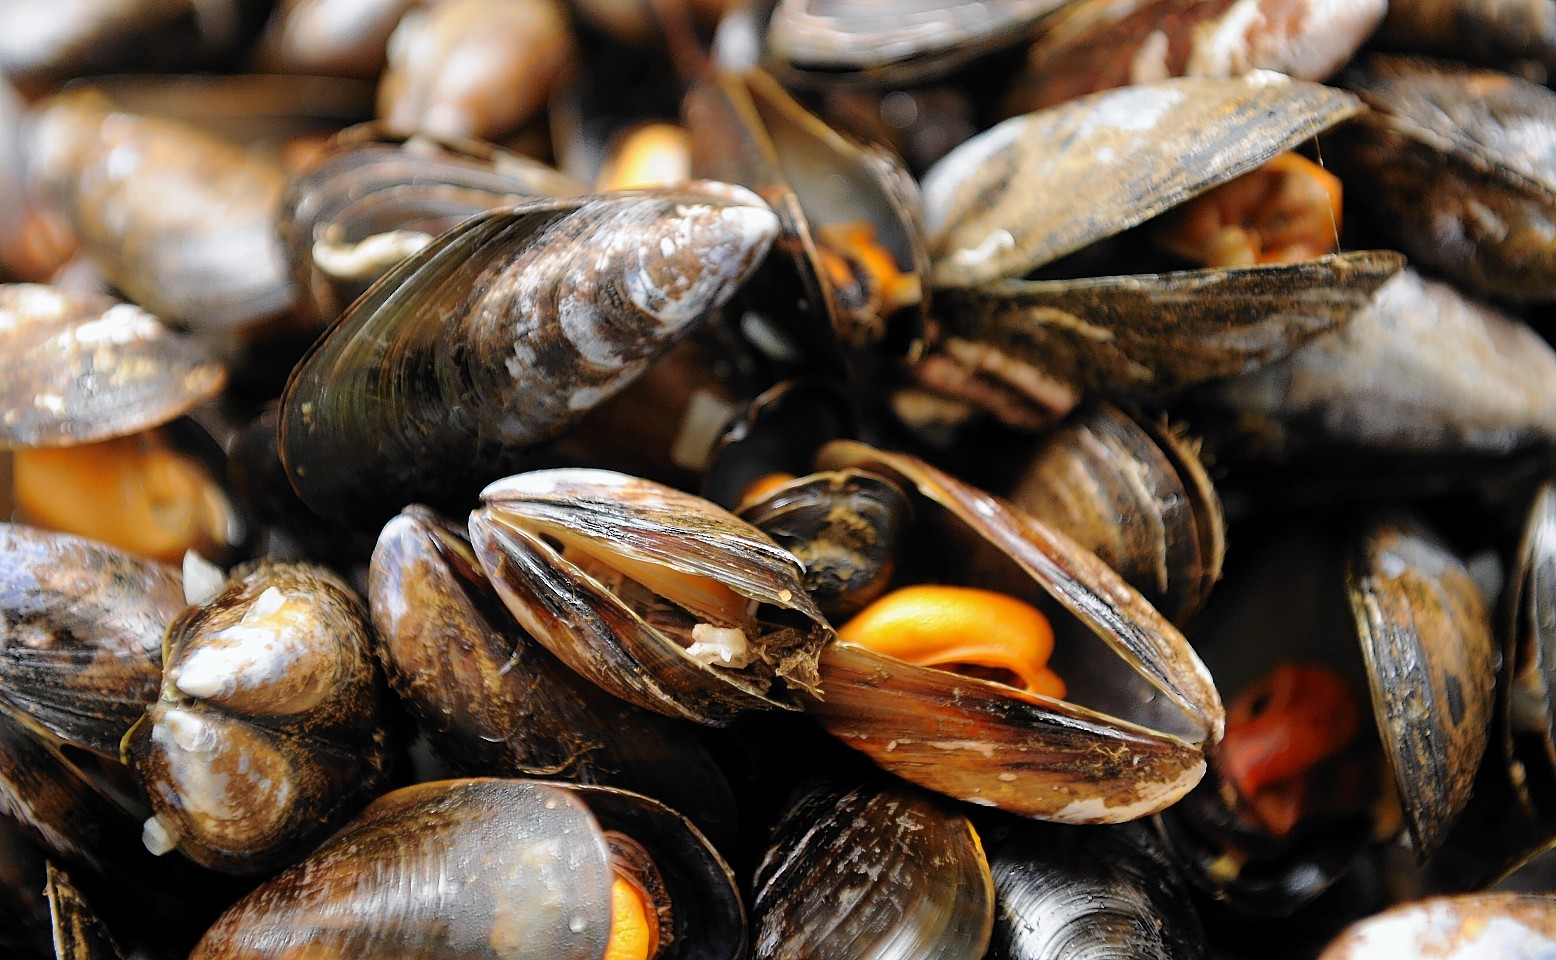 The first summit will focus on the farmed shellfish sector